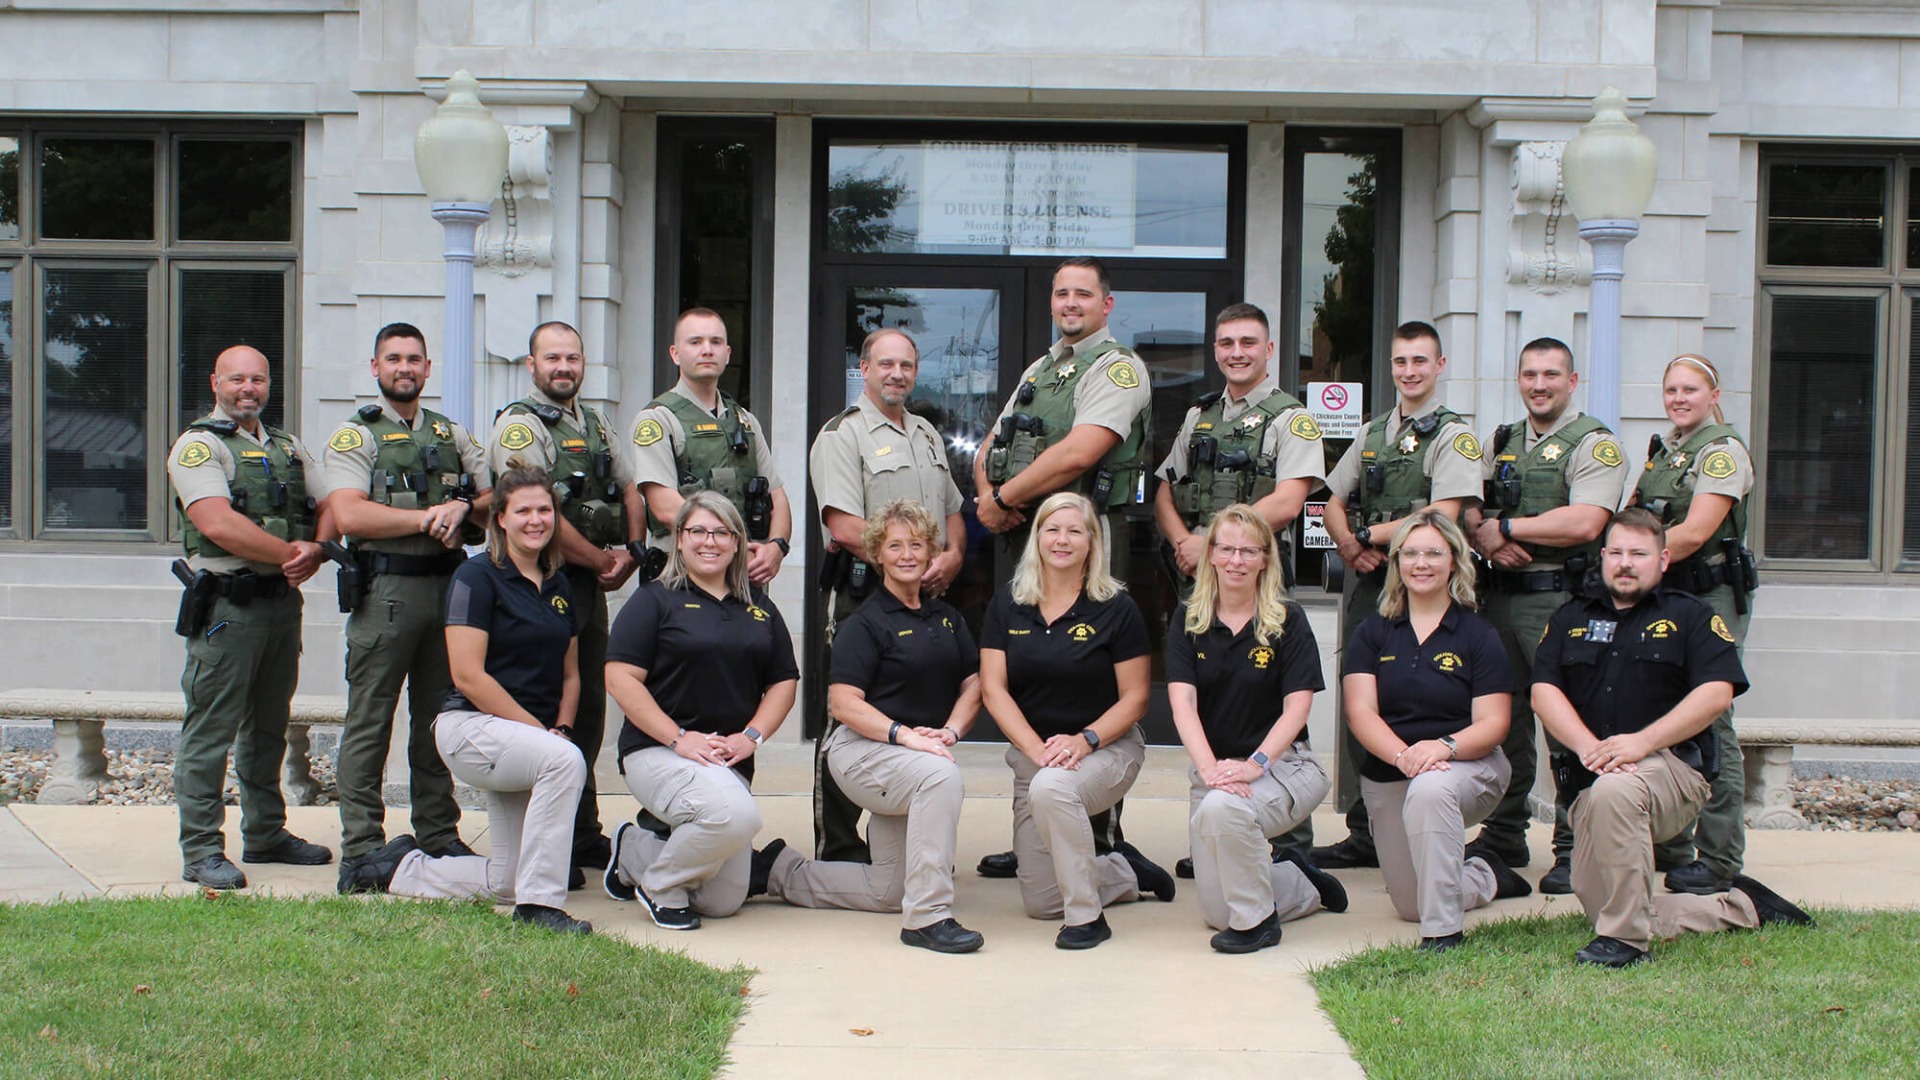 The Chickasaw County Sheriff's Office staff members posing for a photo outside of the county courthouse.